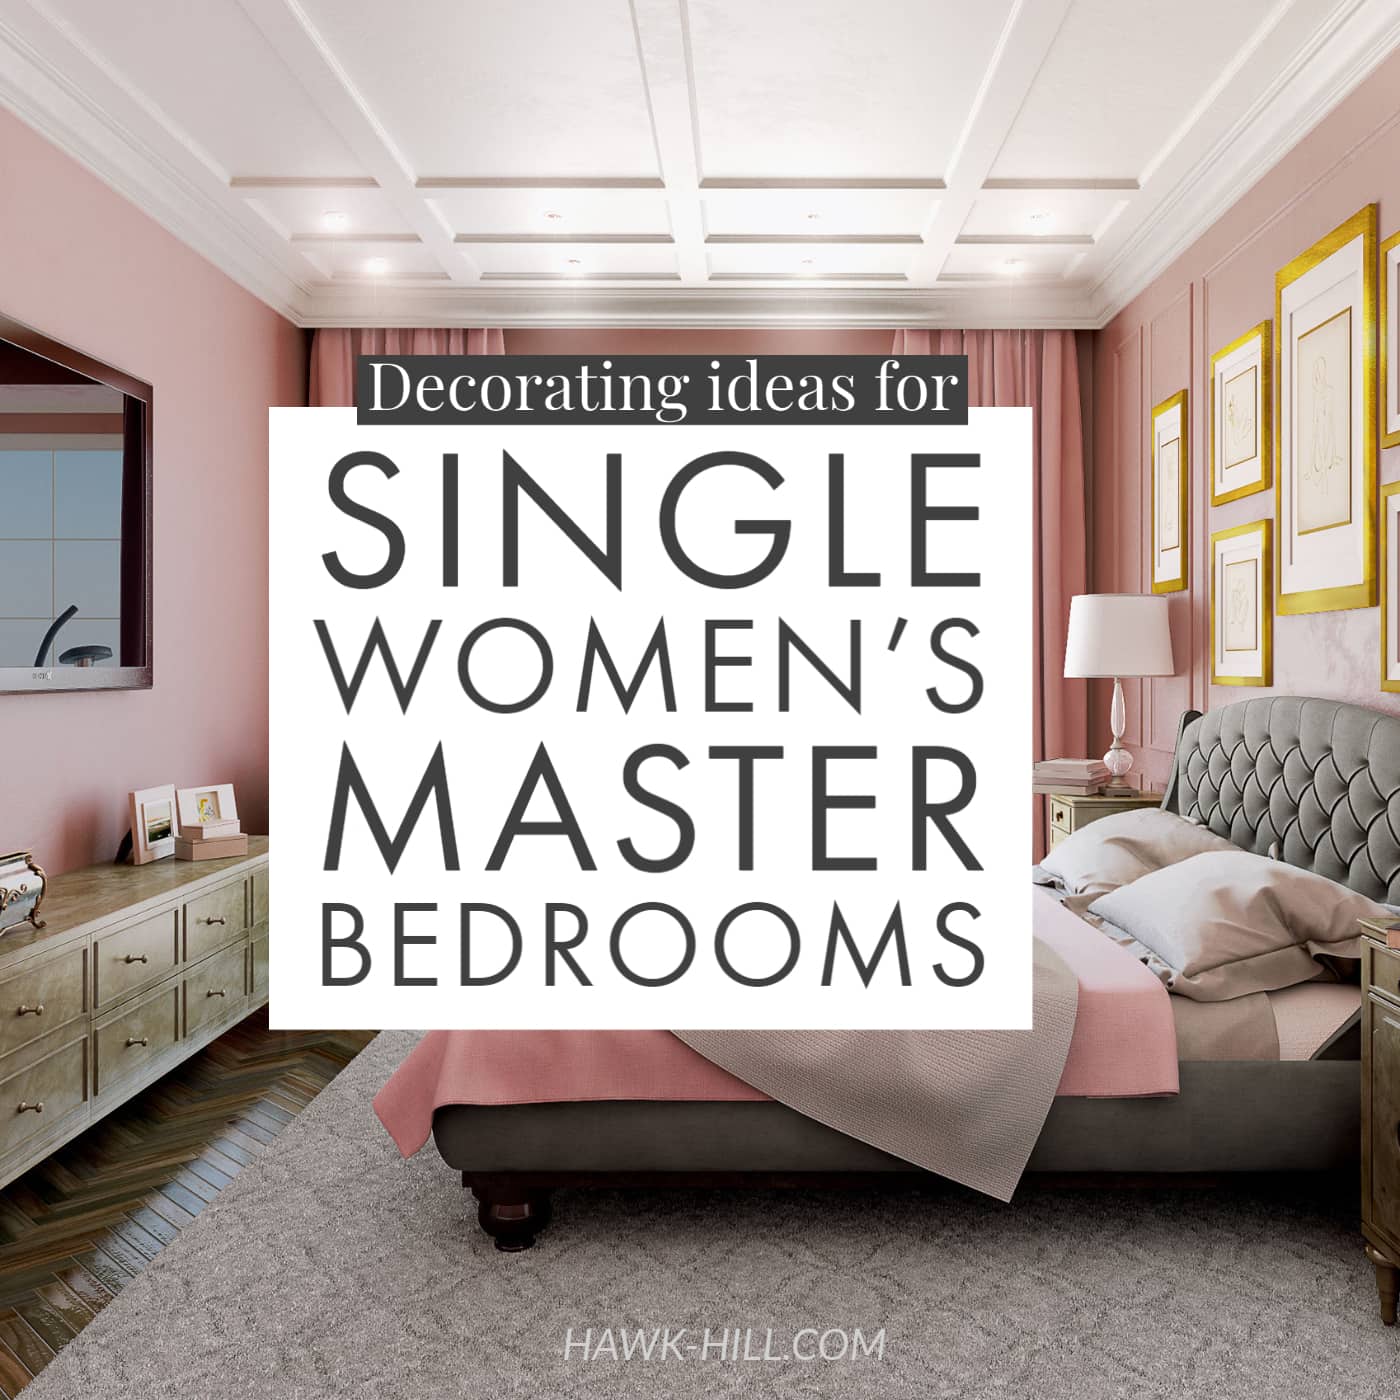 Bedroom Decorating ideas for Single Women's Master